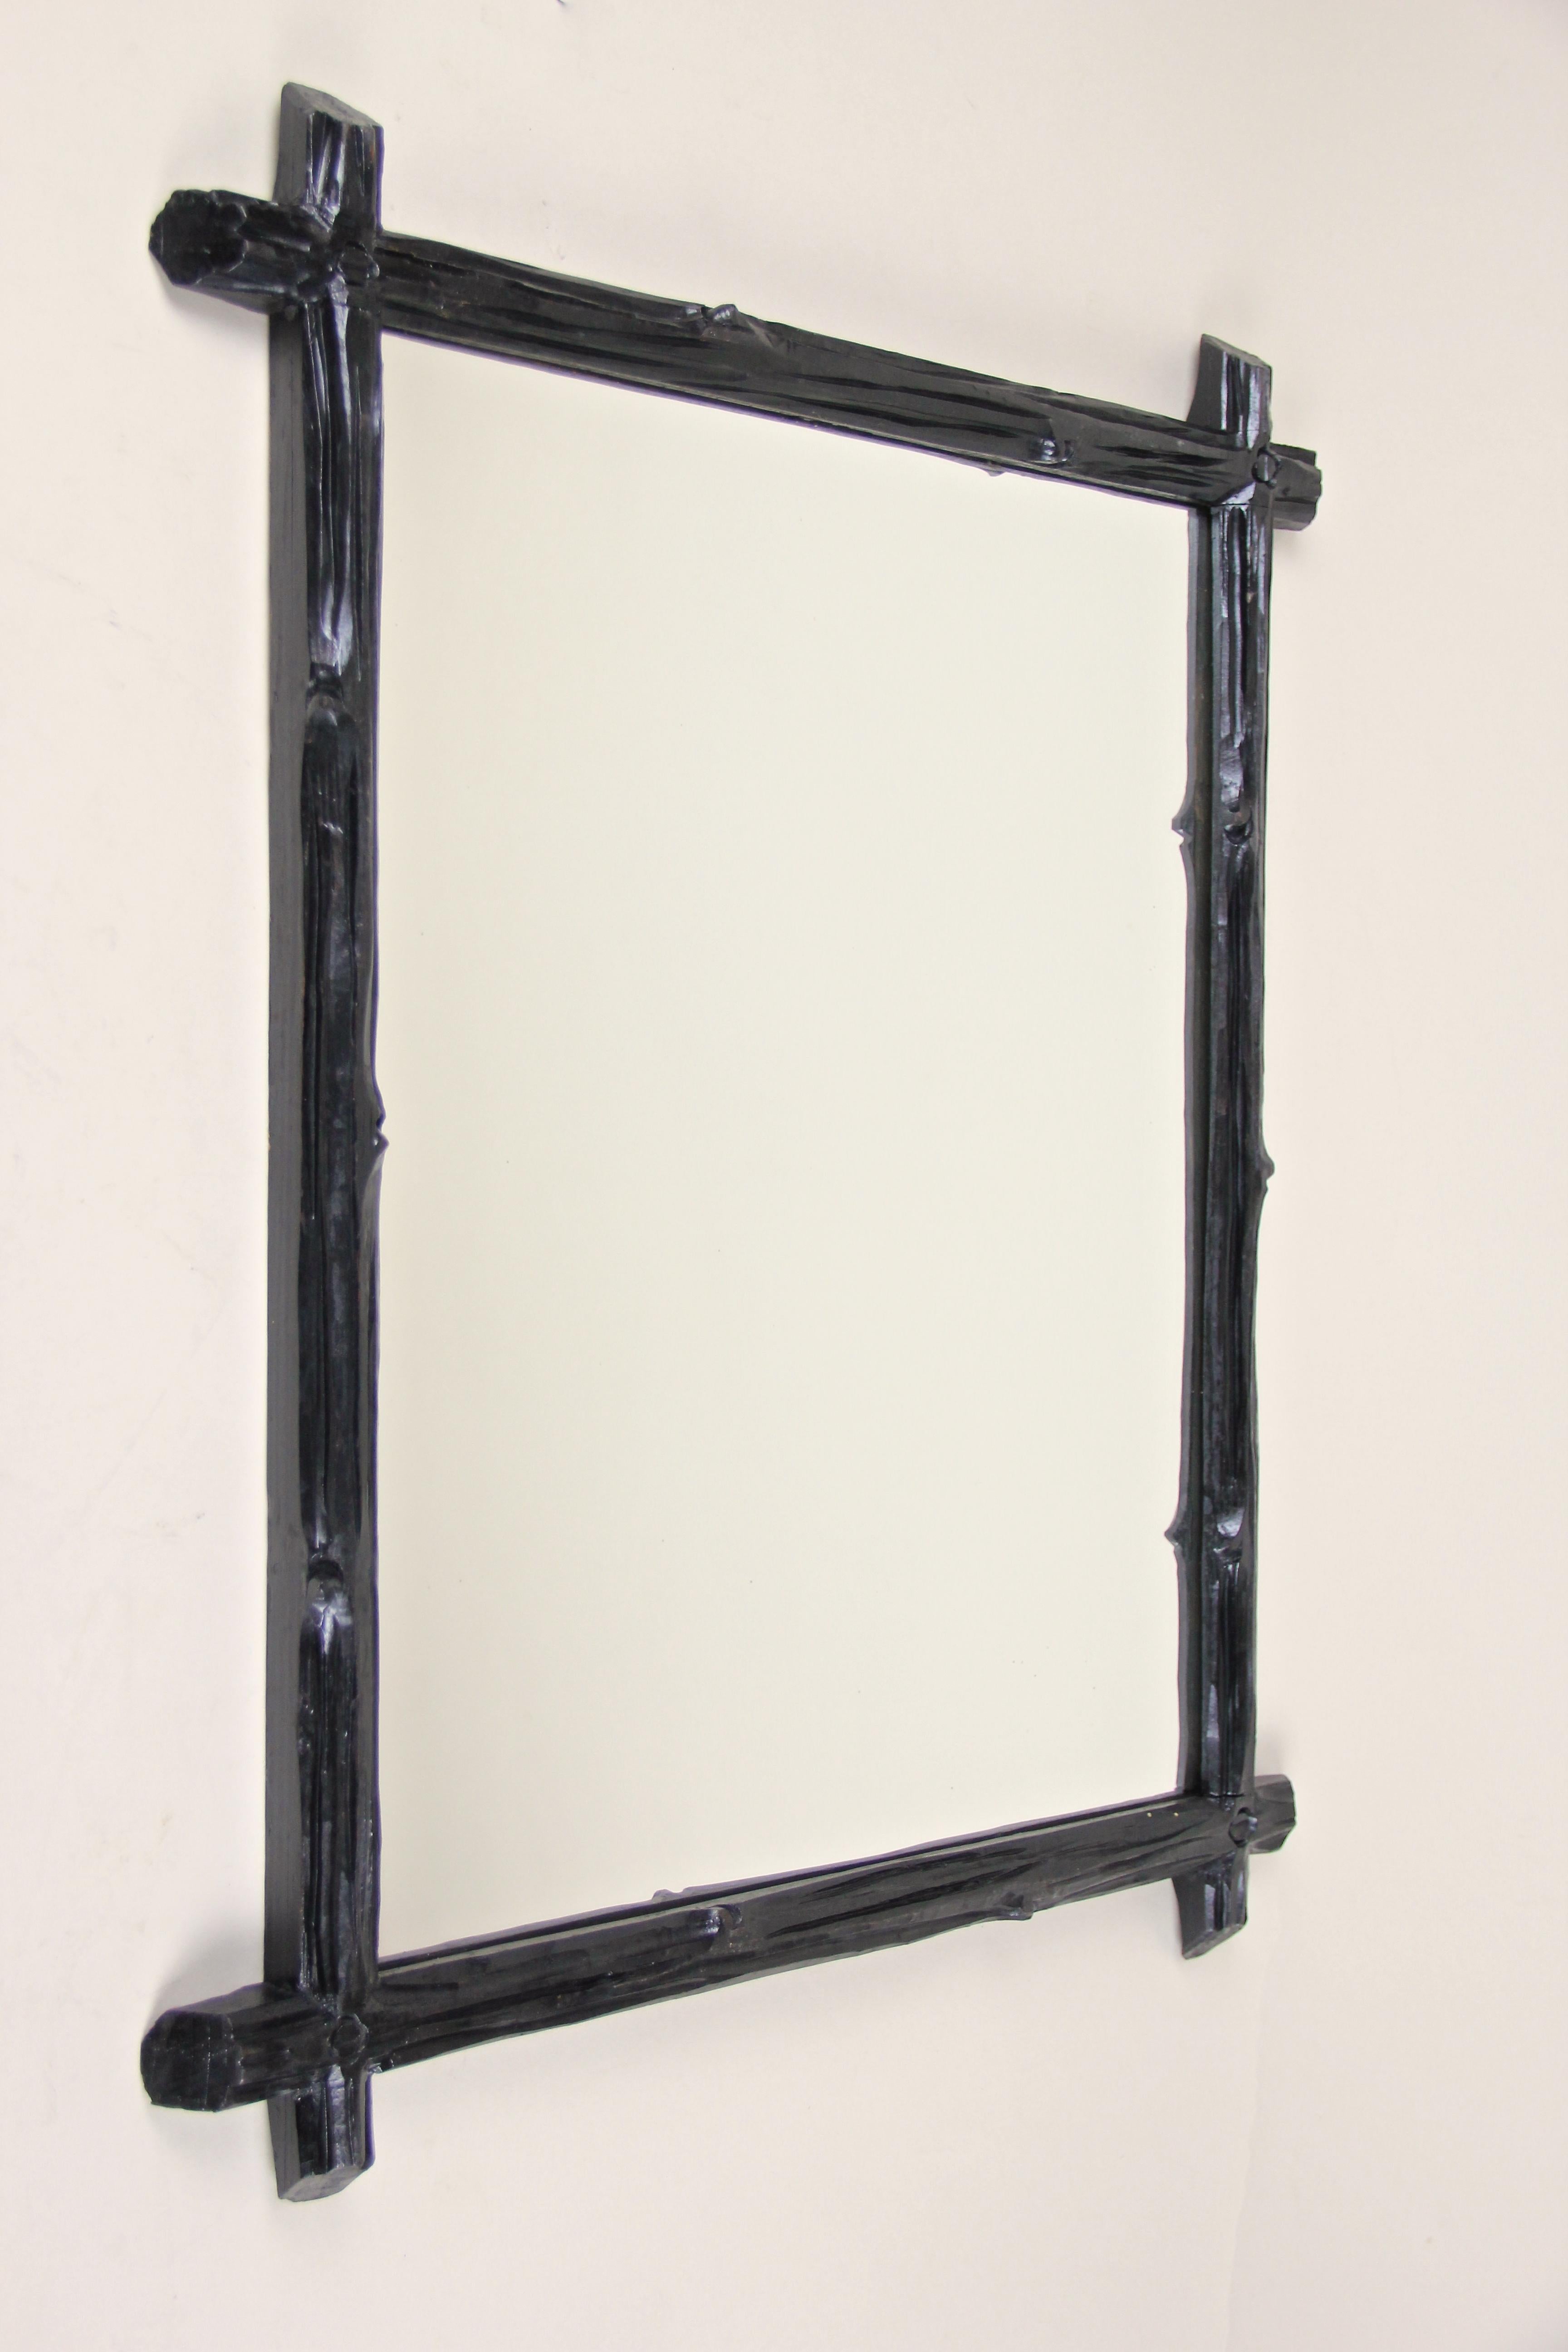 Rustic designed Black Forest wall mirror from Austria, circa 1880. This exceptional antique wall mirror impresses with a simple but elegant 